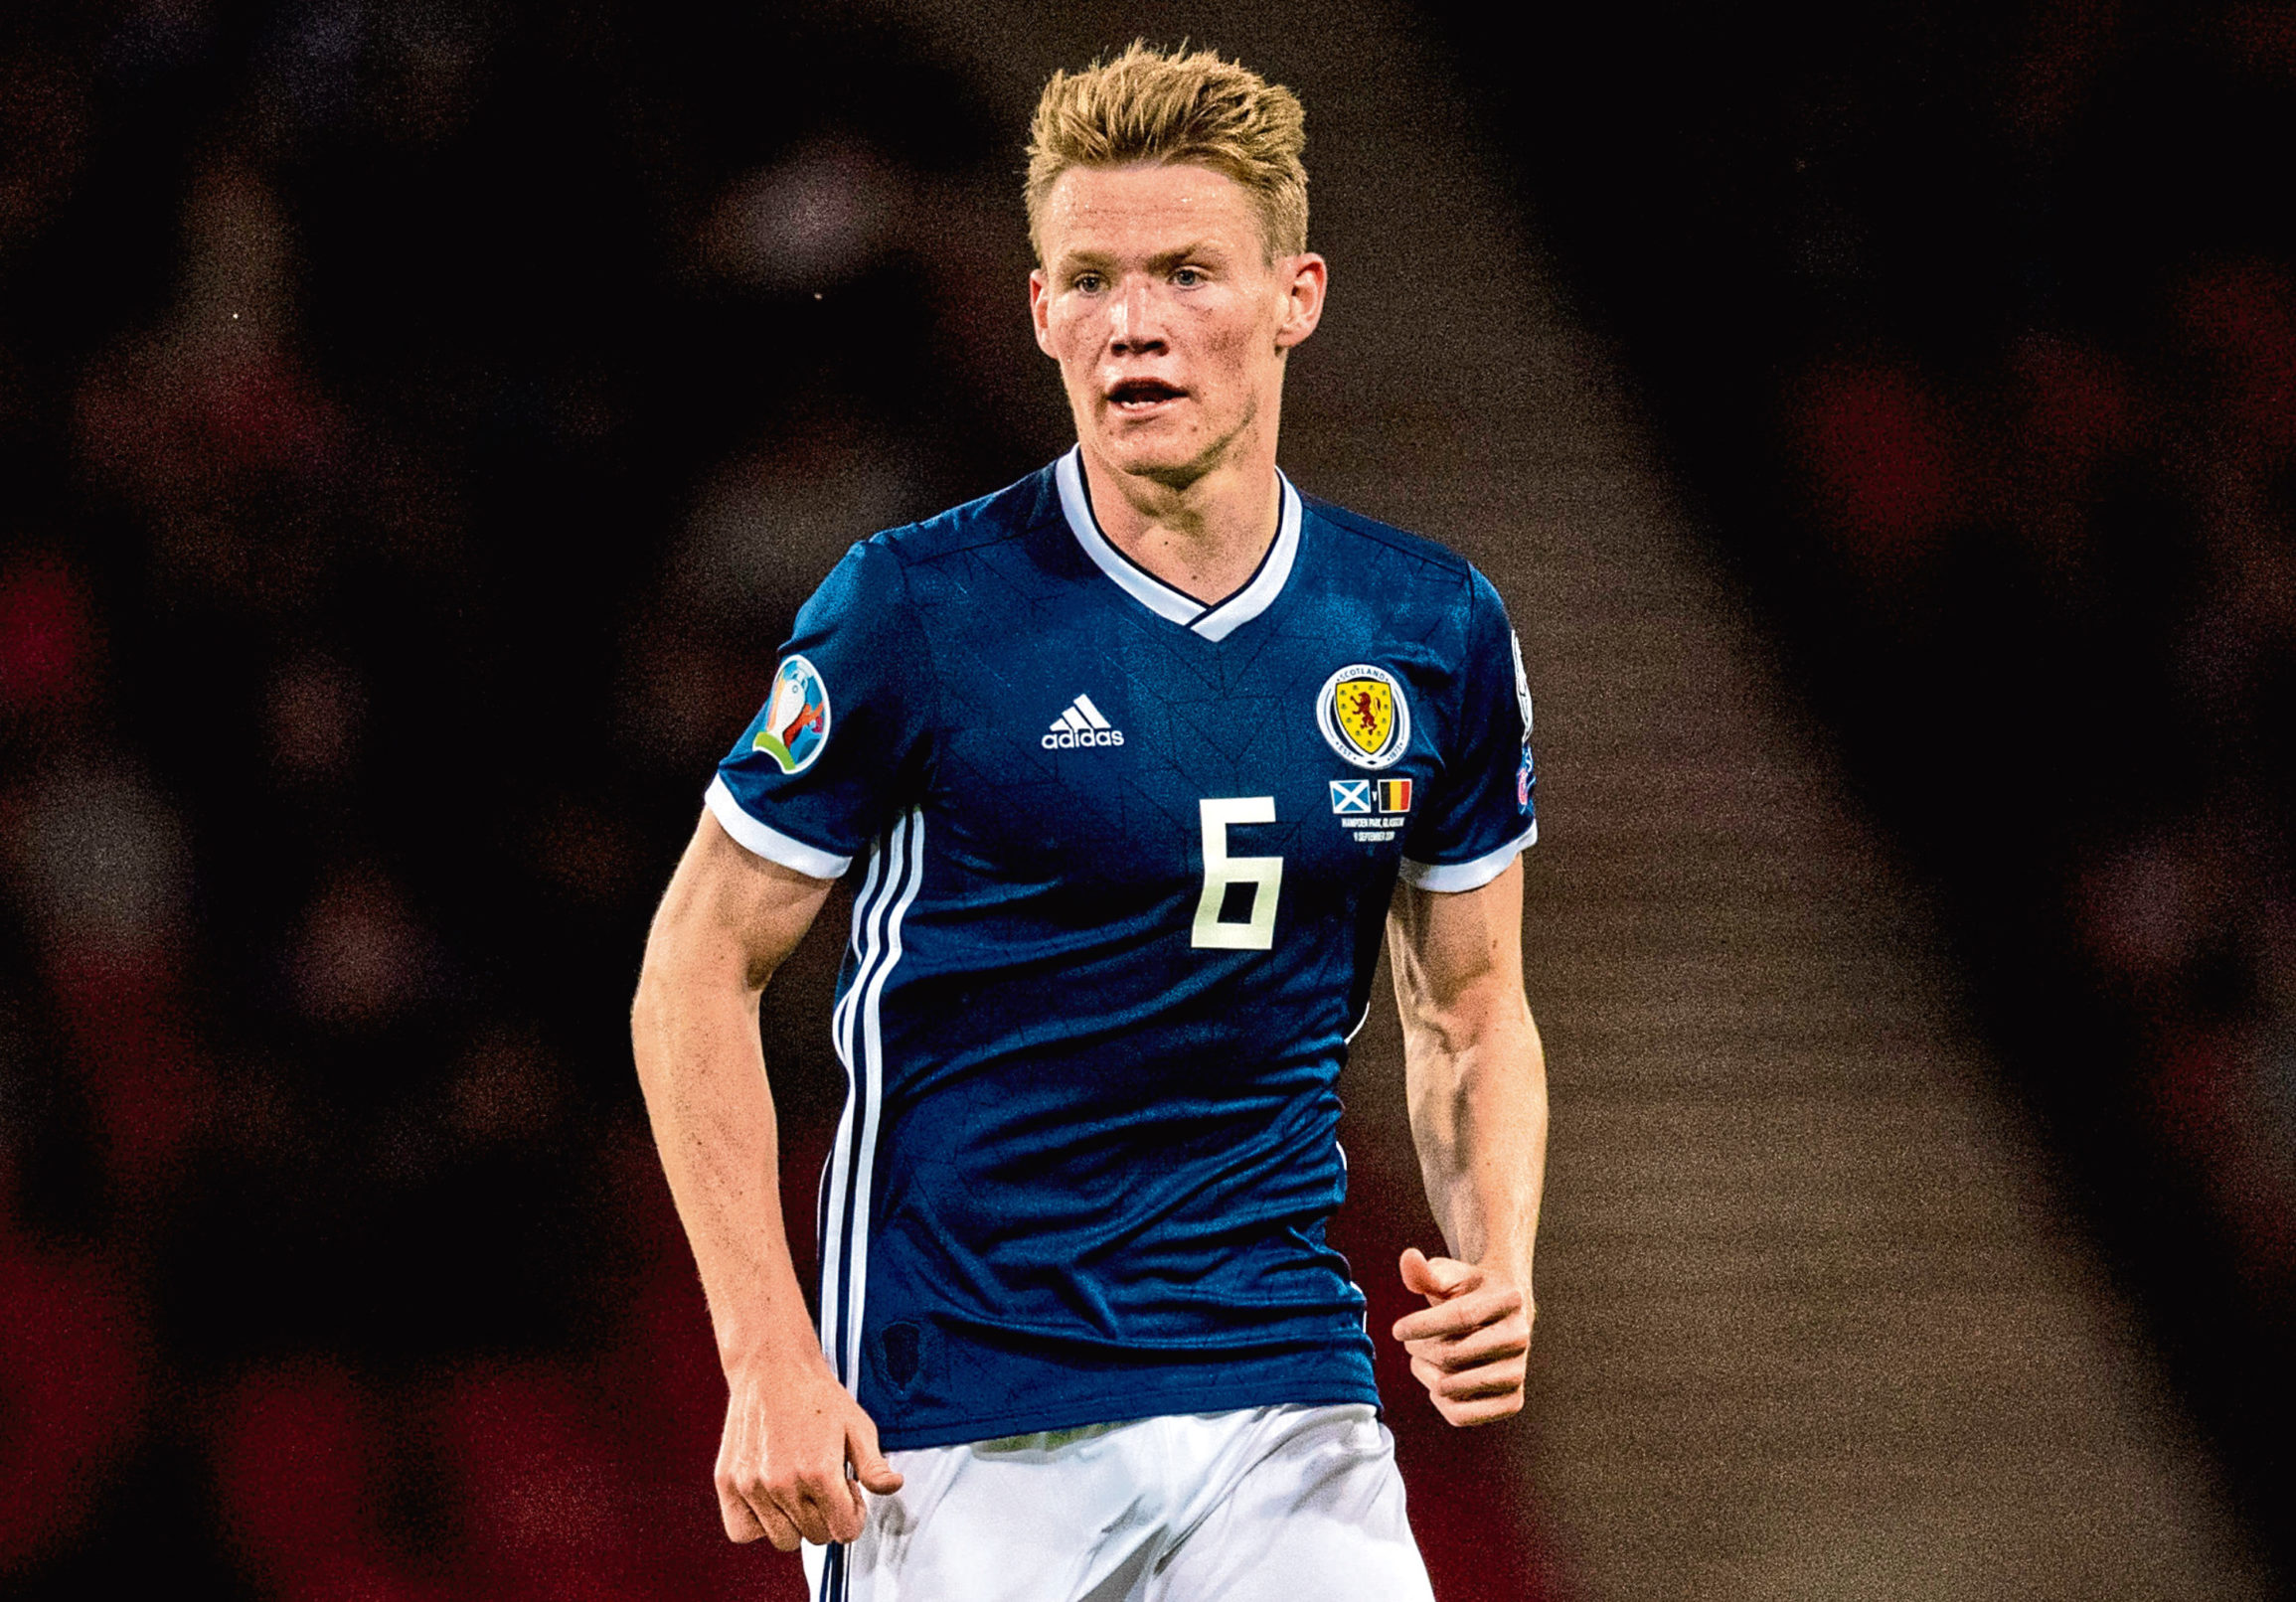 Scott McTominay in action for Scotland during a UEFA Euro 2020 qualifier between Scotland and Belgium, at Hampden Park, on September 9, 2019, in Glasgow, Scotland.